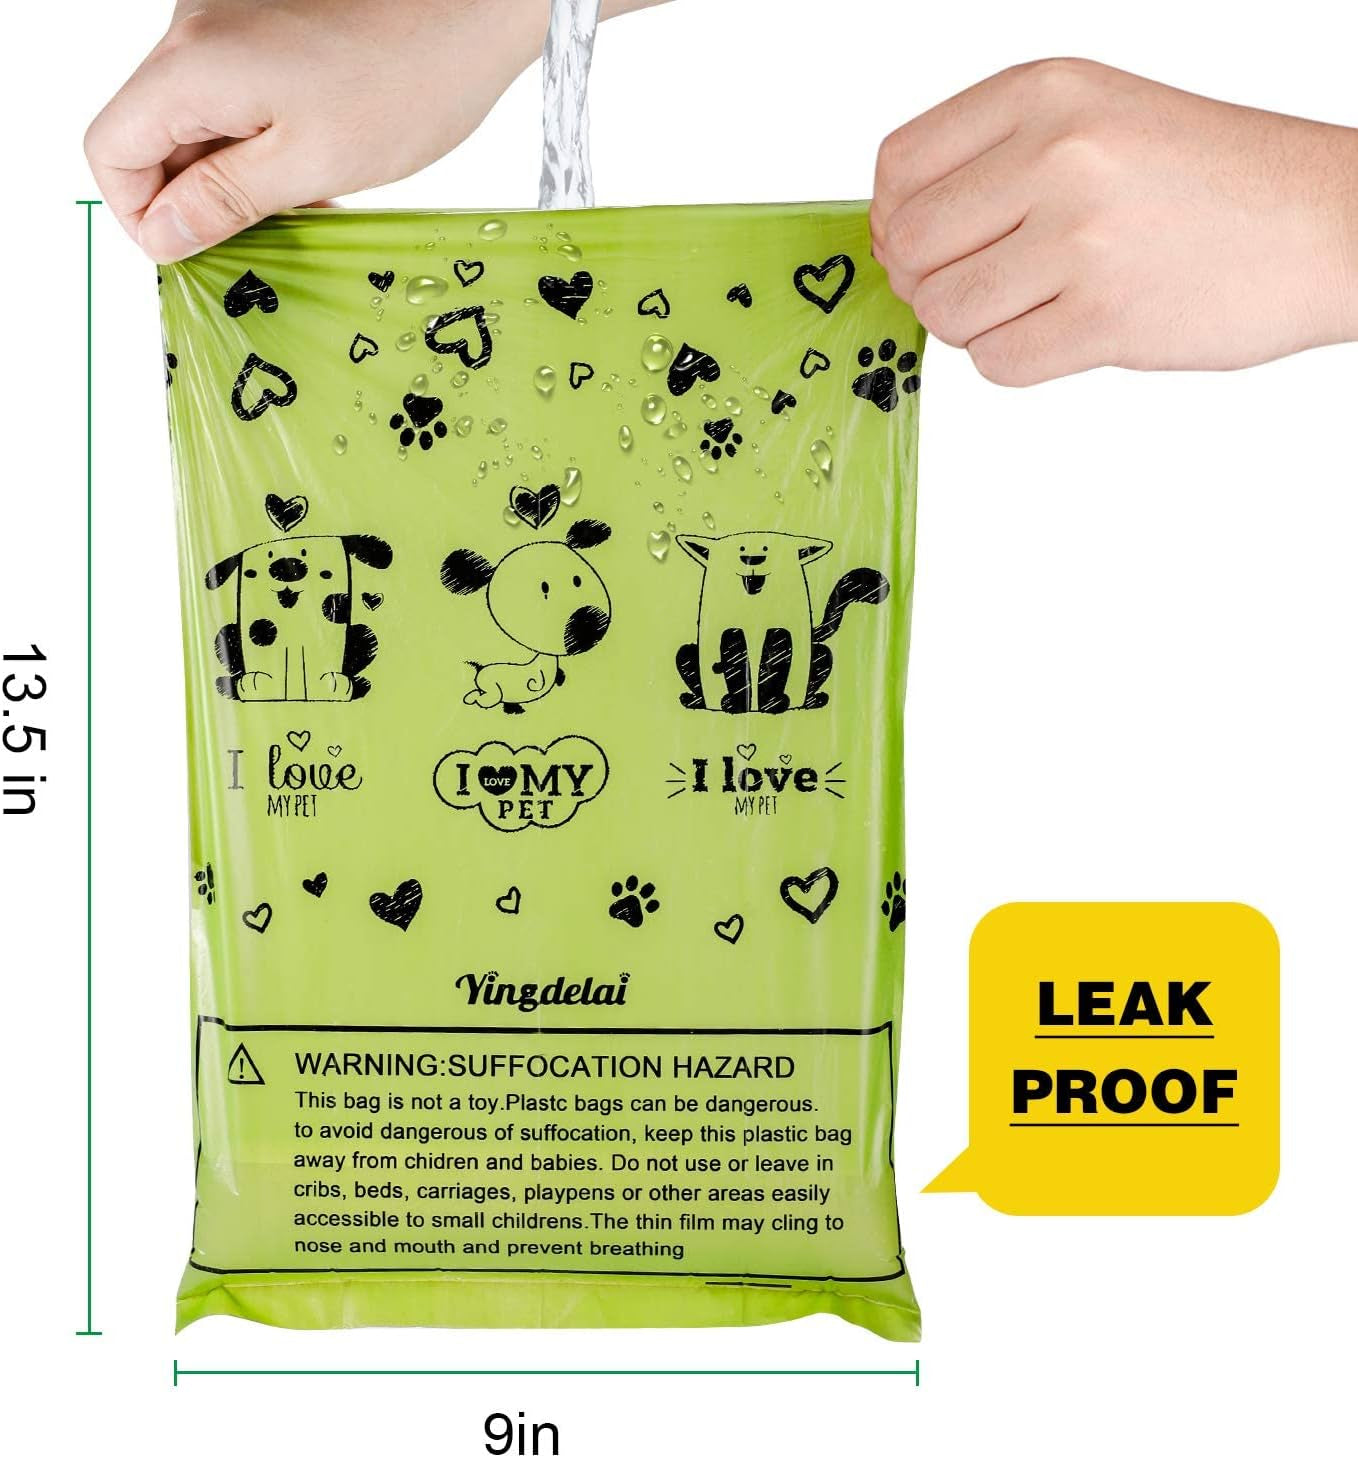 Biodegradable Dog Poop Bags: 720 Bags Extra Thick Strong Leak Proof Dog Waste Bags for Dogs with 1 Dispenser (4 Mixed Colors Green Blue Yellow Pink) -Scented